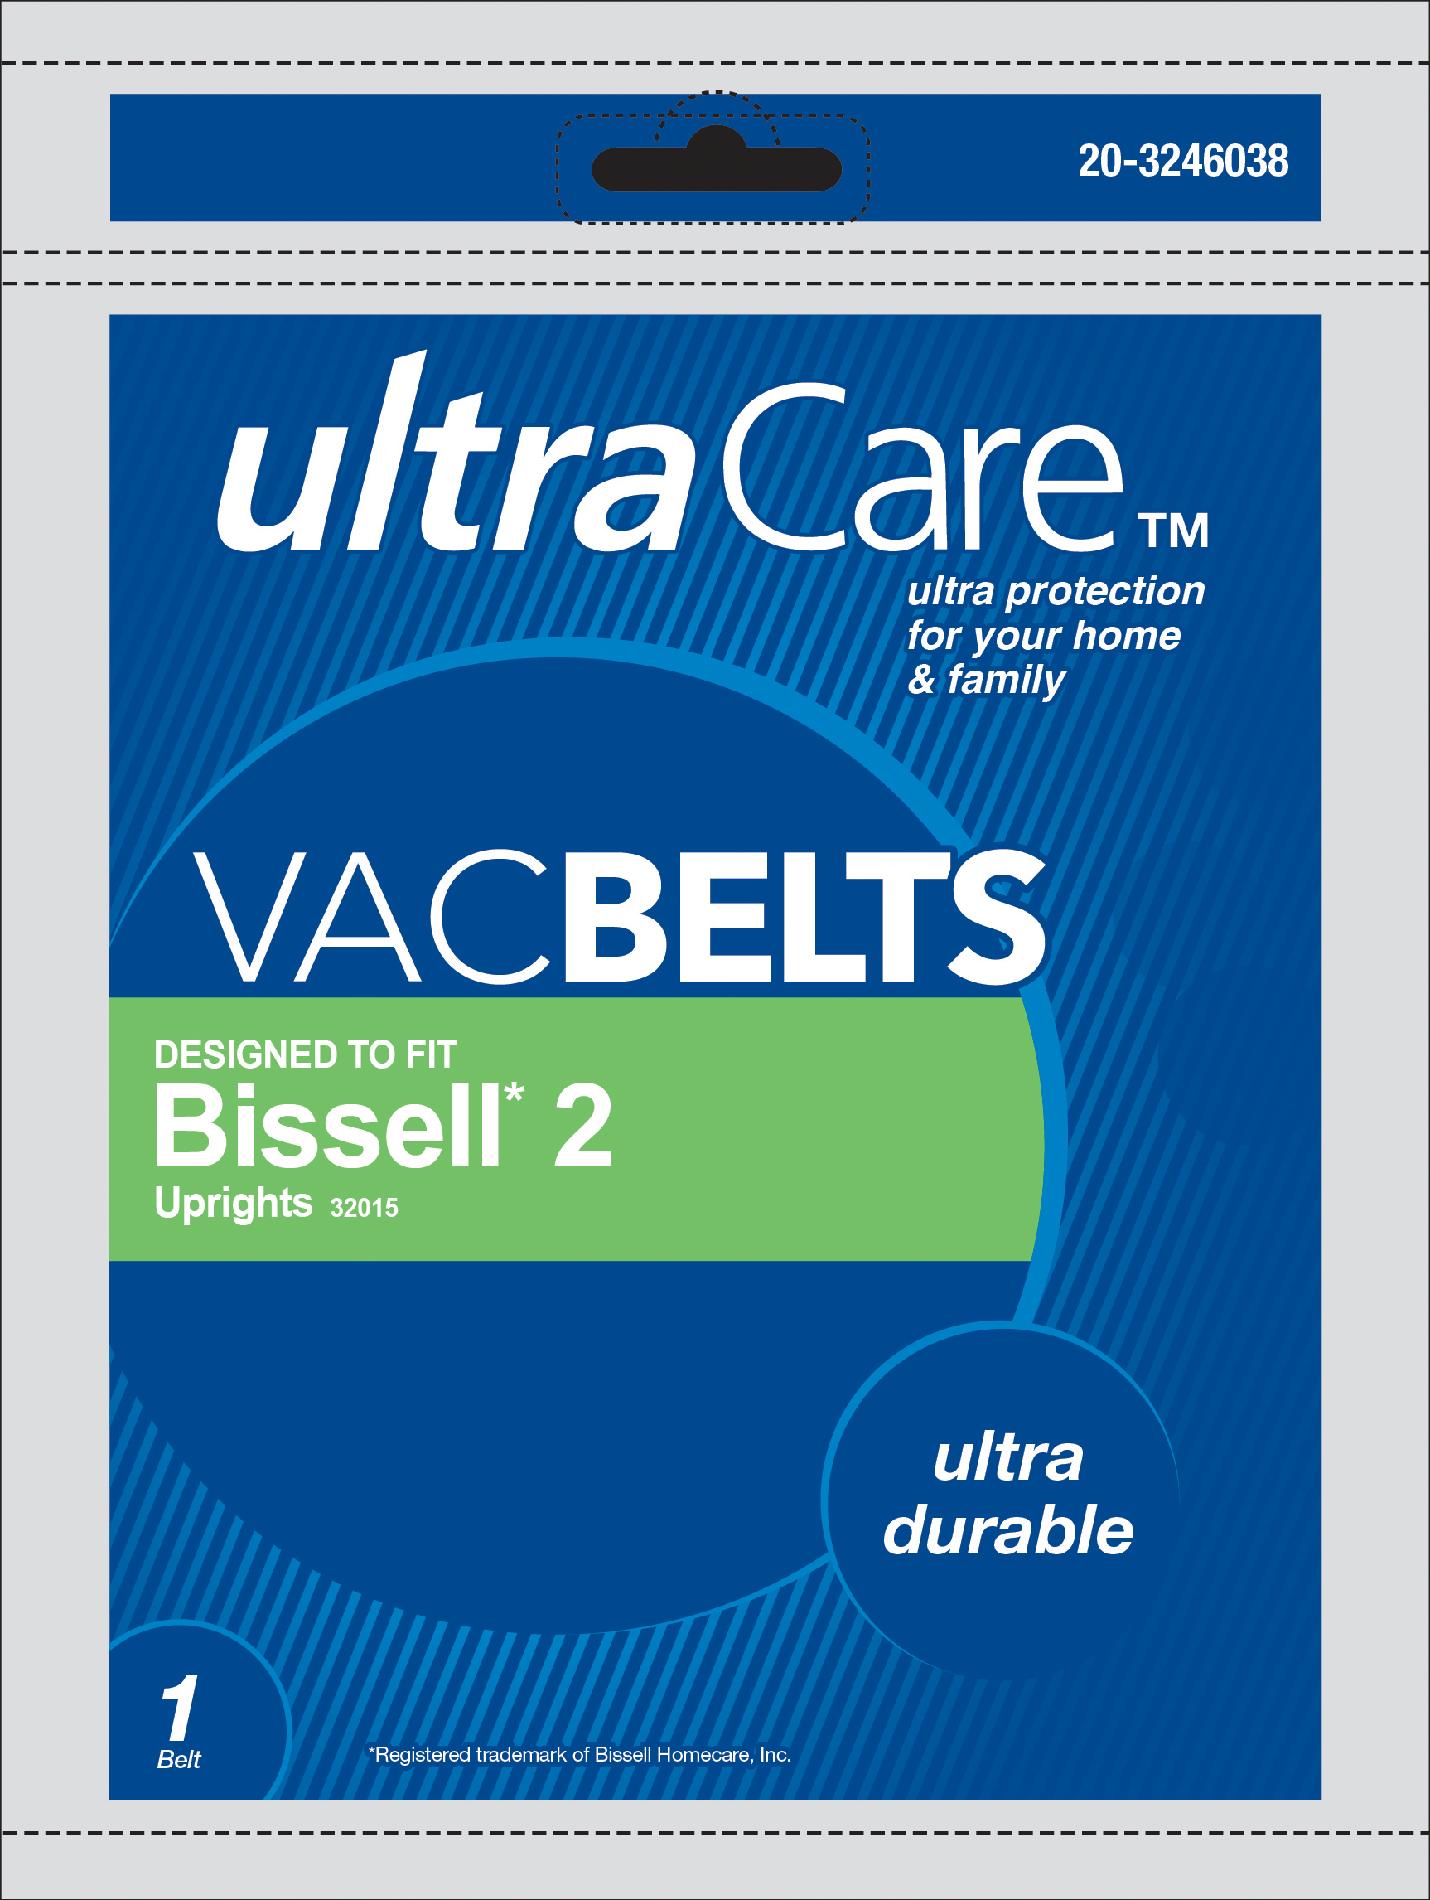 UltraCare UCB6002-6 Vacuum Belt for Bissell&#8482; 2 Upright Vacuum Cleaners